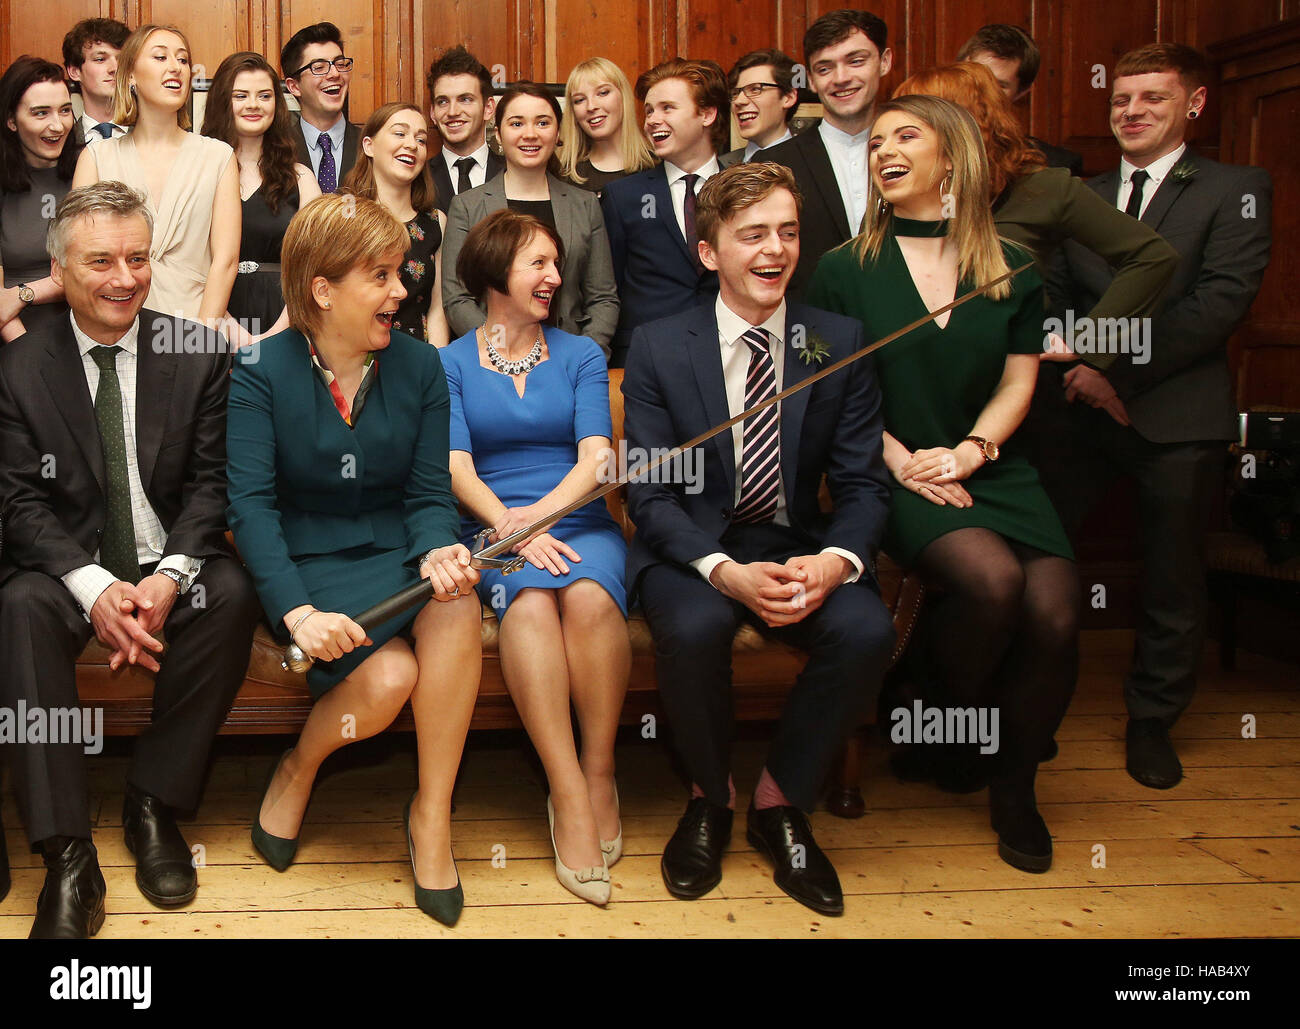 Scottish First Minister Nicola Sturgeon (front, second left) and the Provost of Trinity College Dublin, Patrick Prendergast (front left) are joined by 22 members of the Philosophical Society at Trinity College Dublin before she received an honorary patronage from the the college. Stock Photo